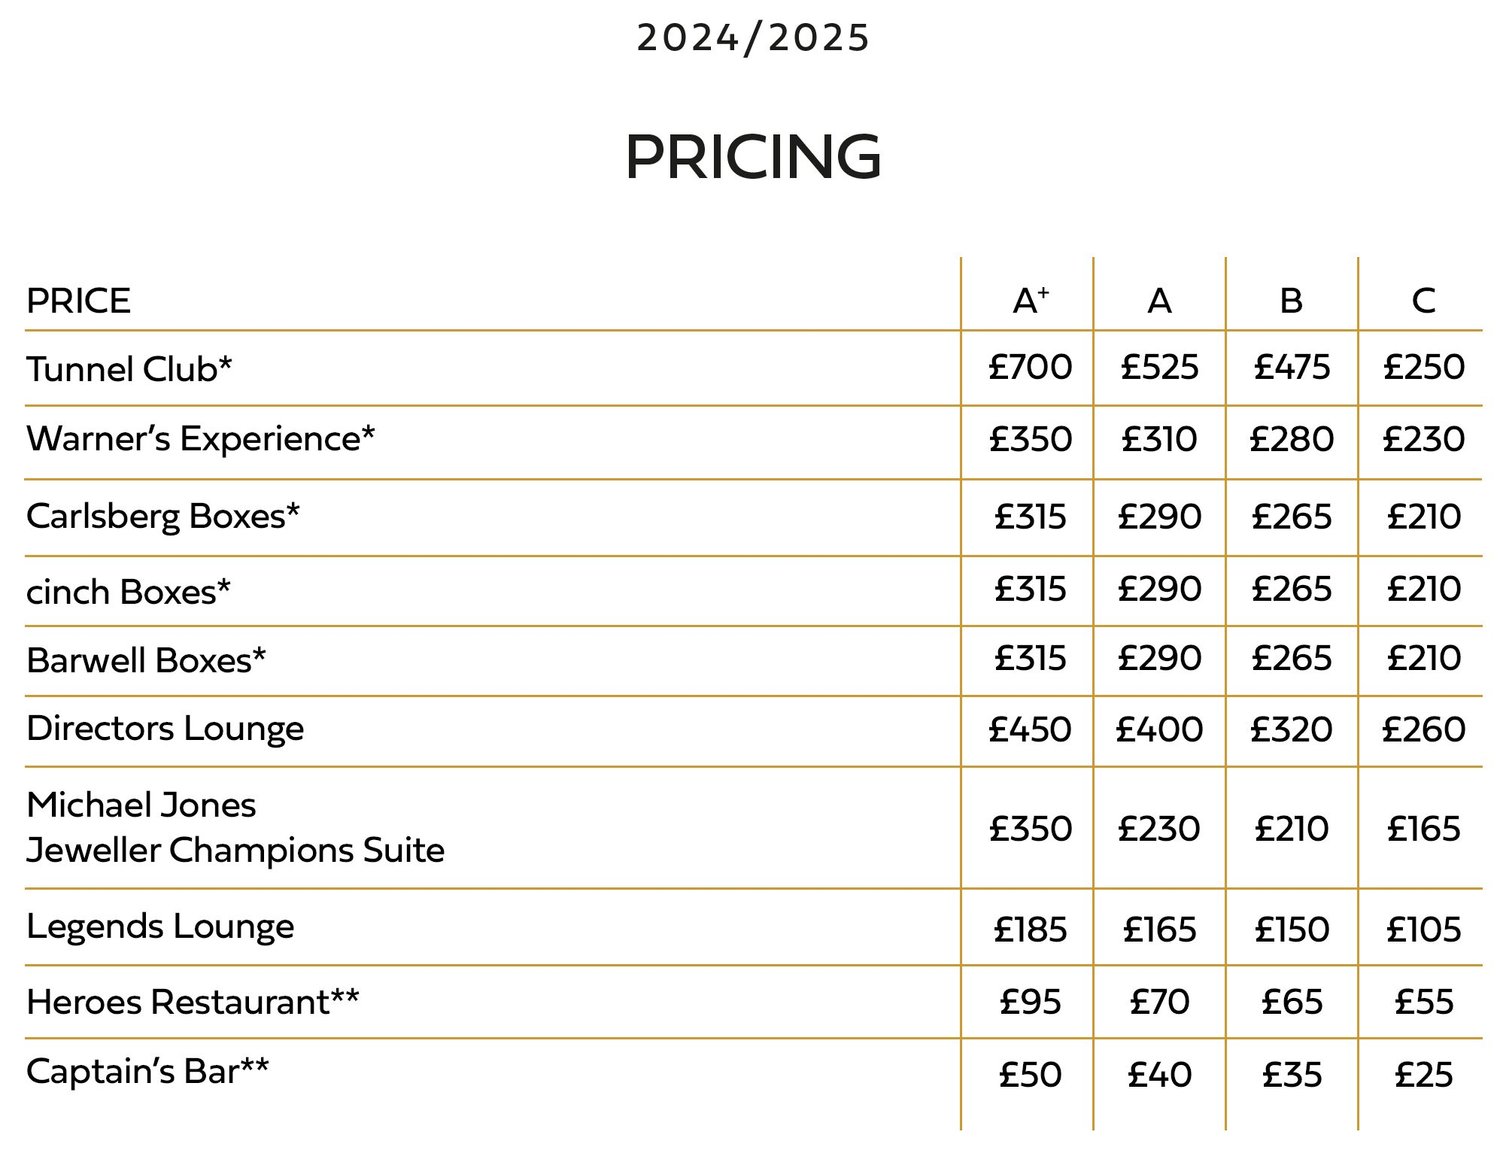 2024/25 Hospitality pricing table